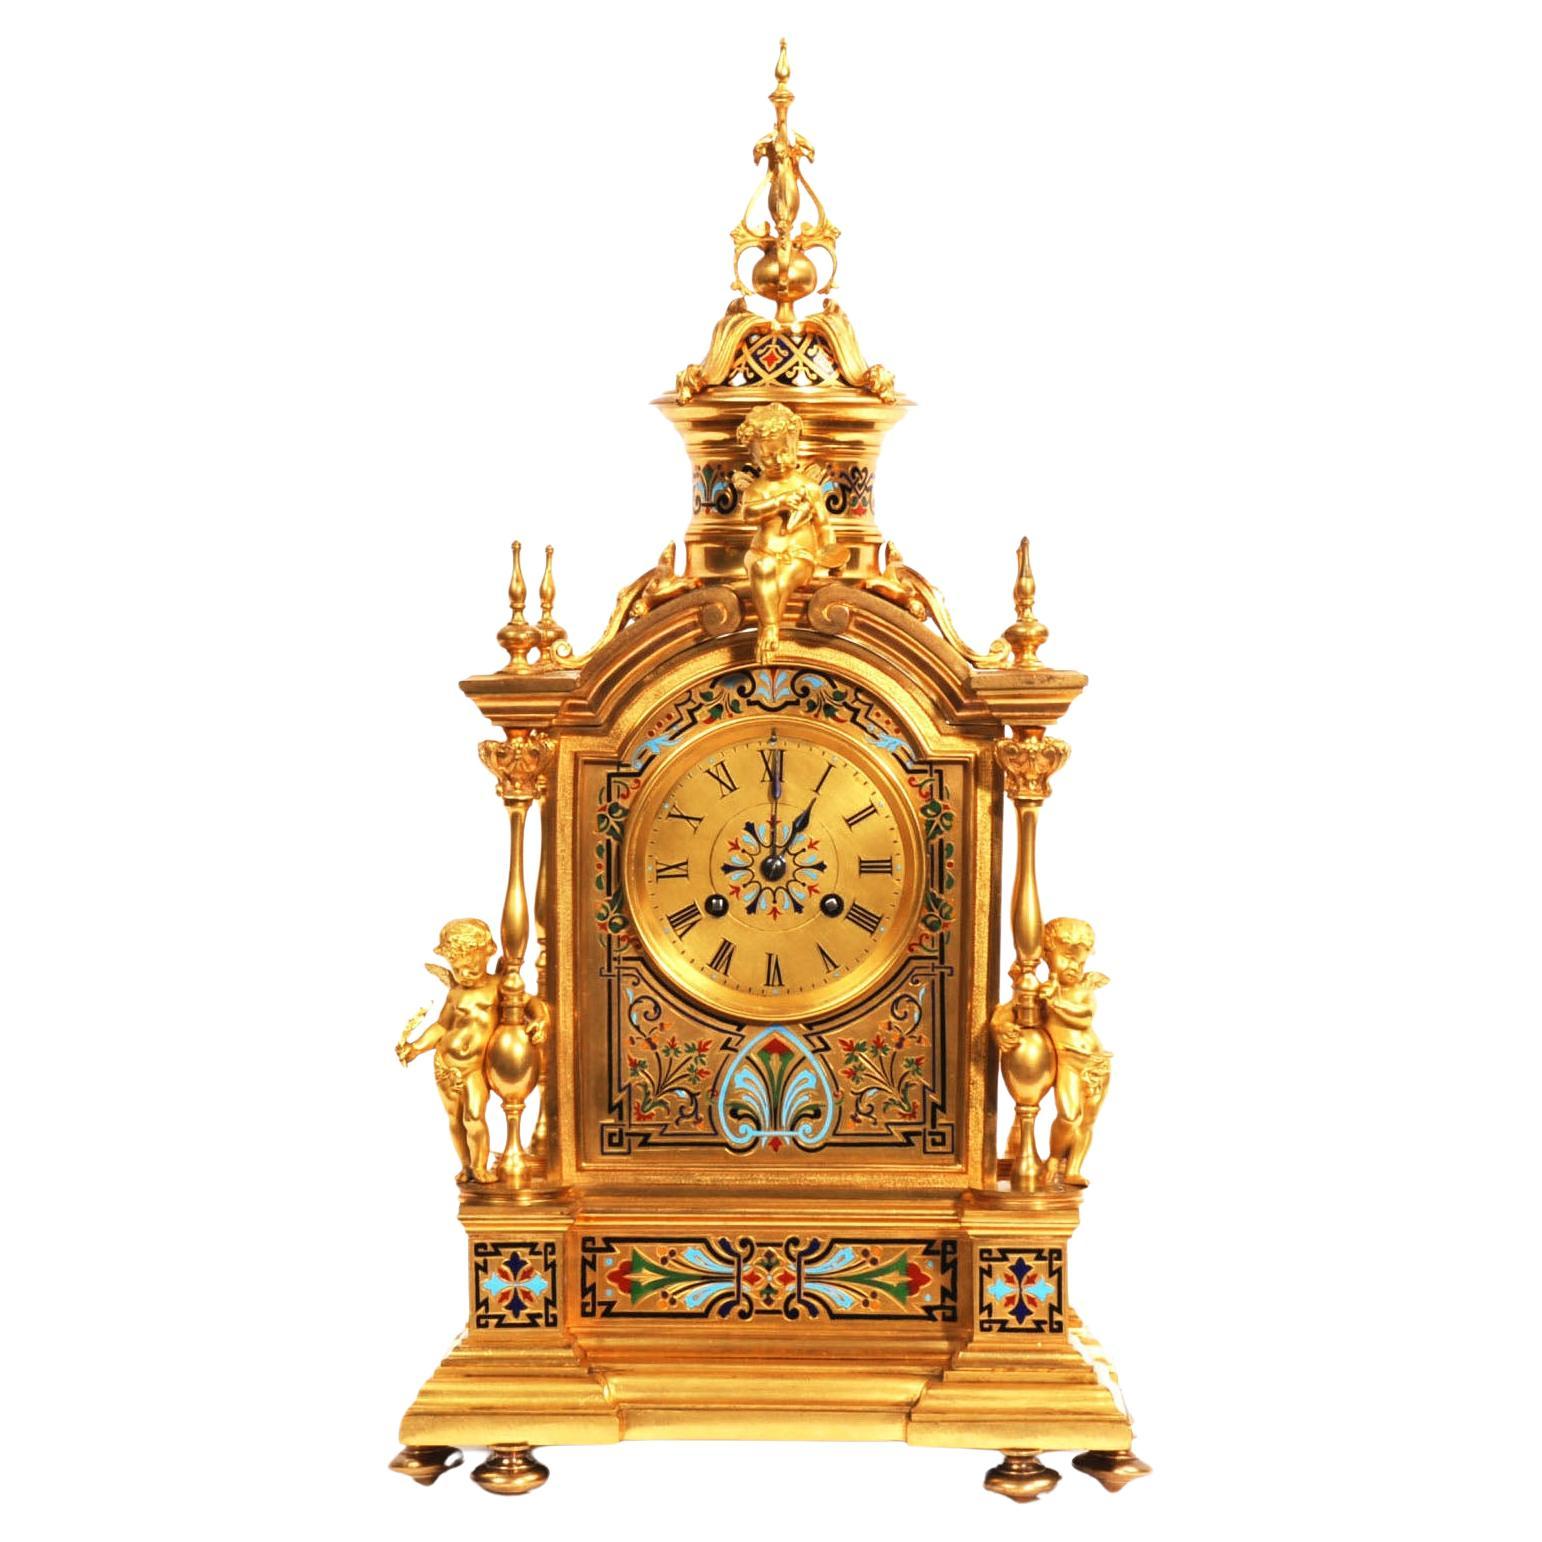 Ormolu and Champleve Enamel Antique French Clock by Le Roy & Fils 